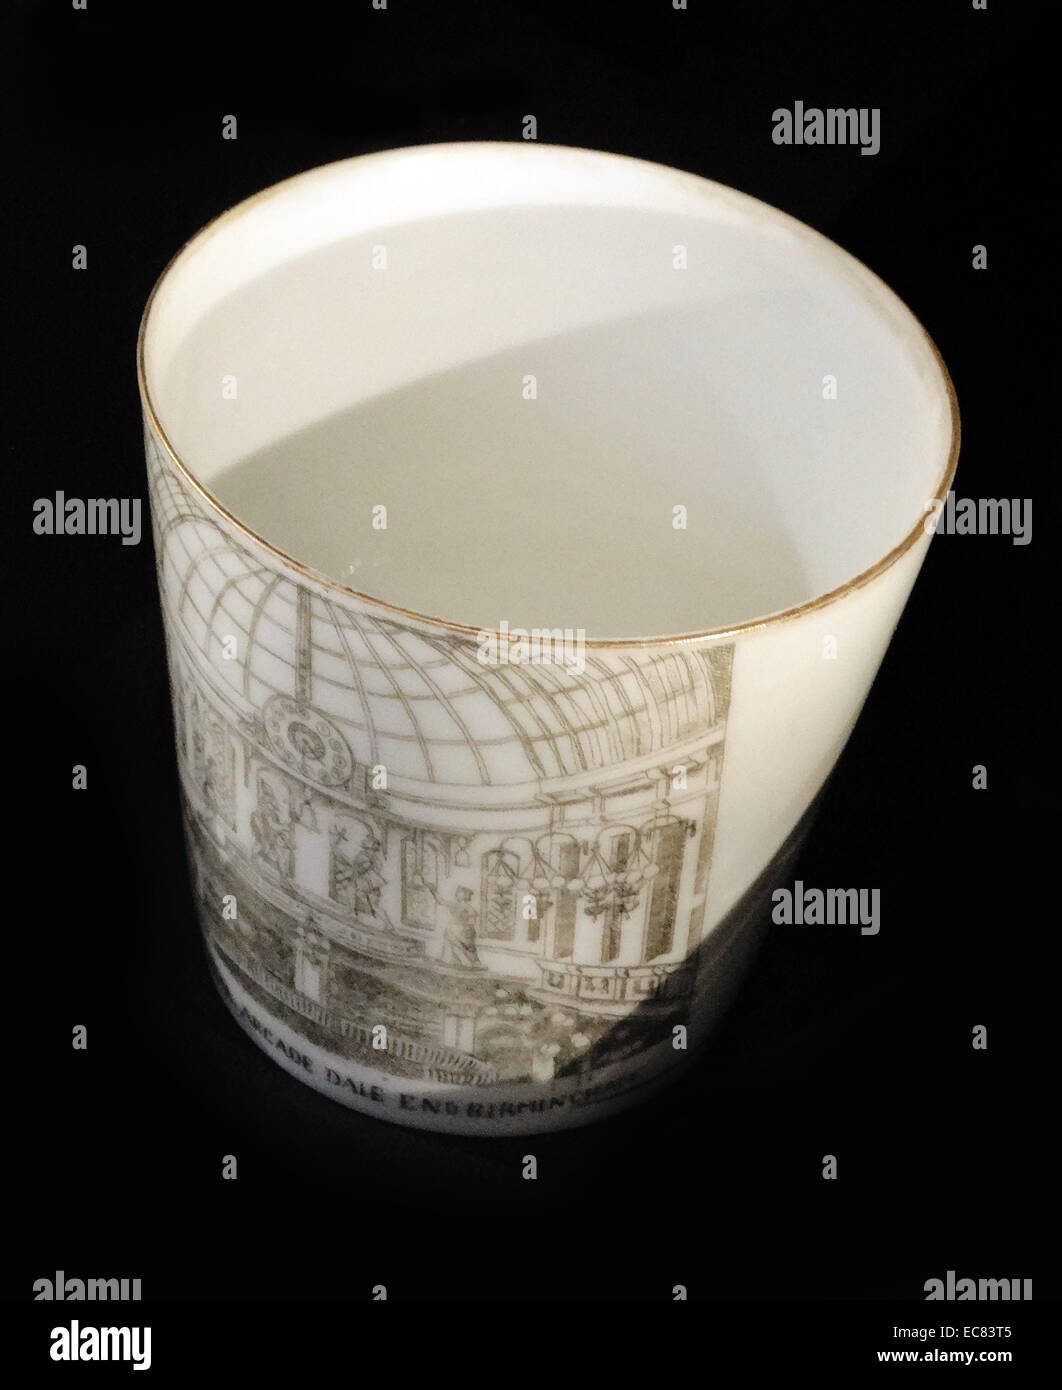 Cup commemorating Imperial Arcade. Stock Photo